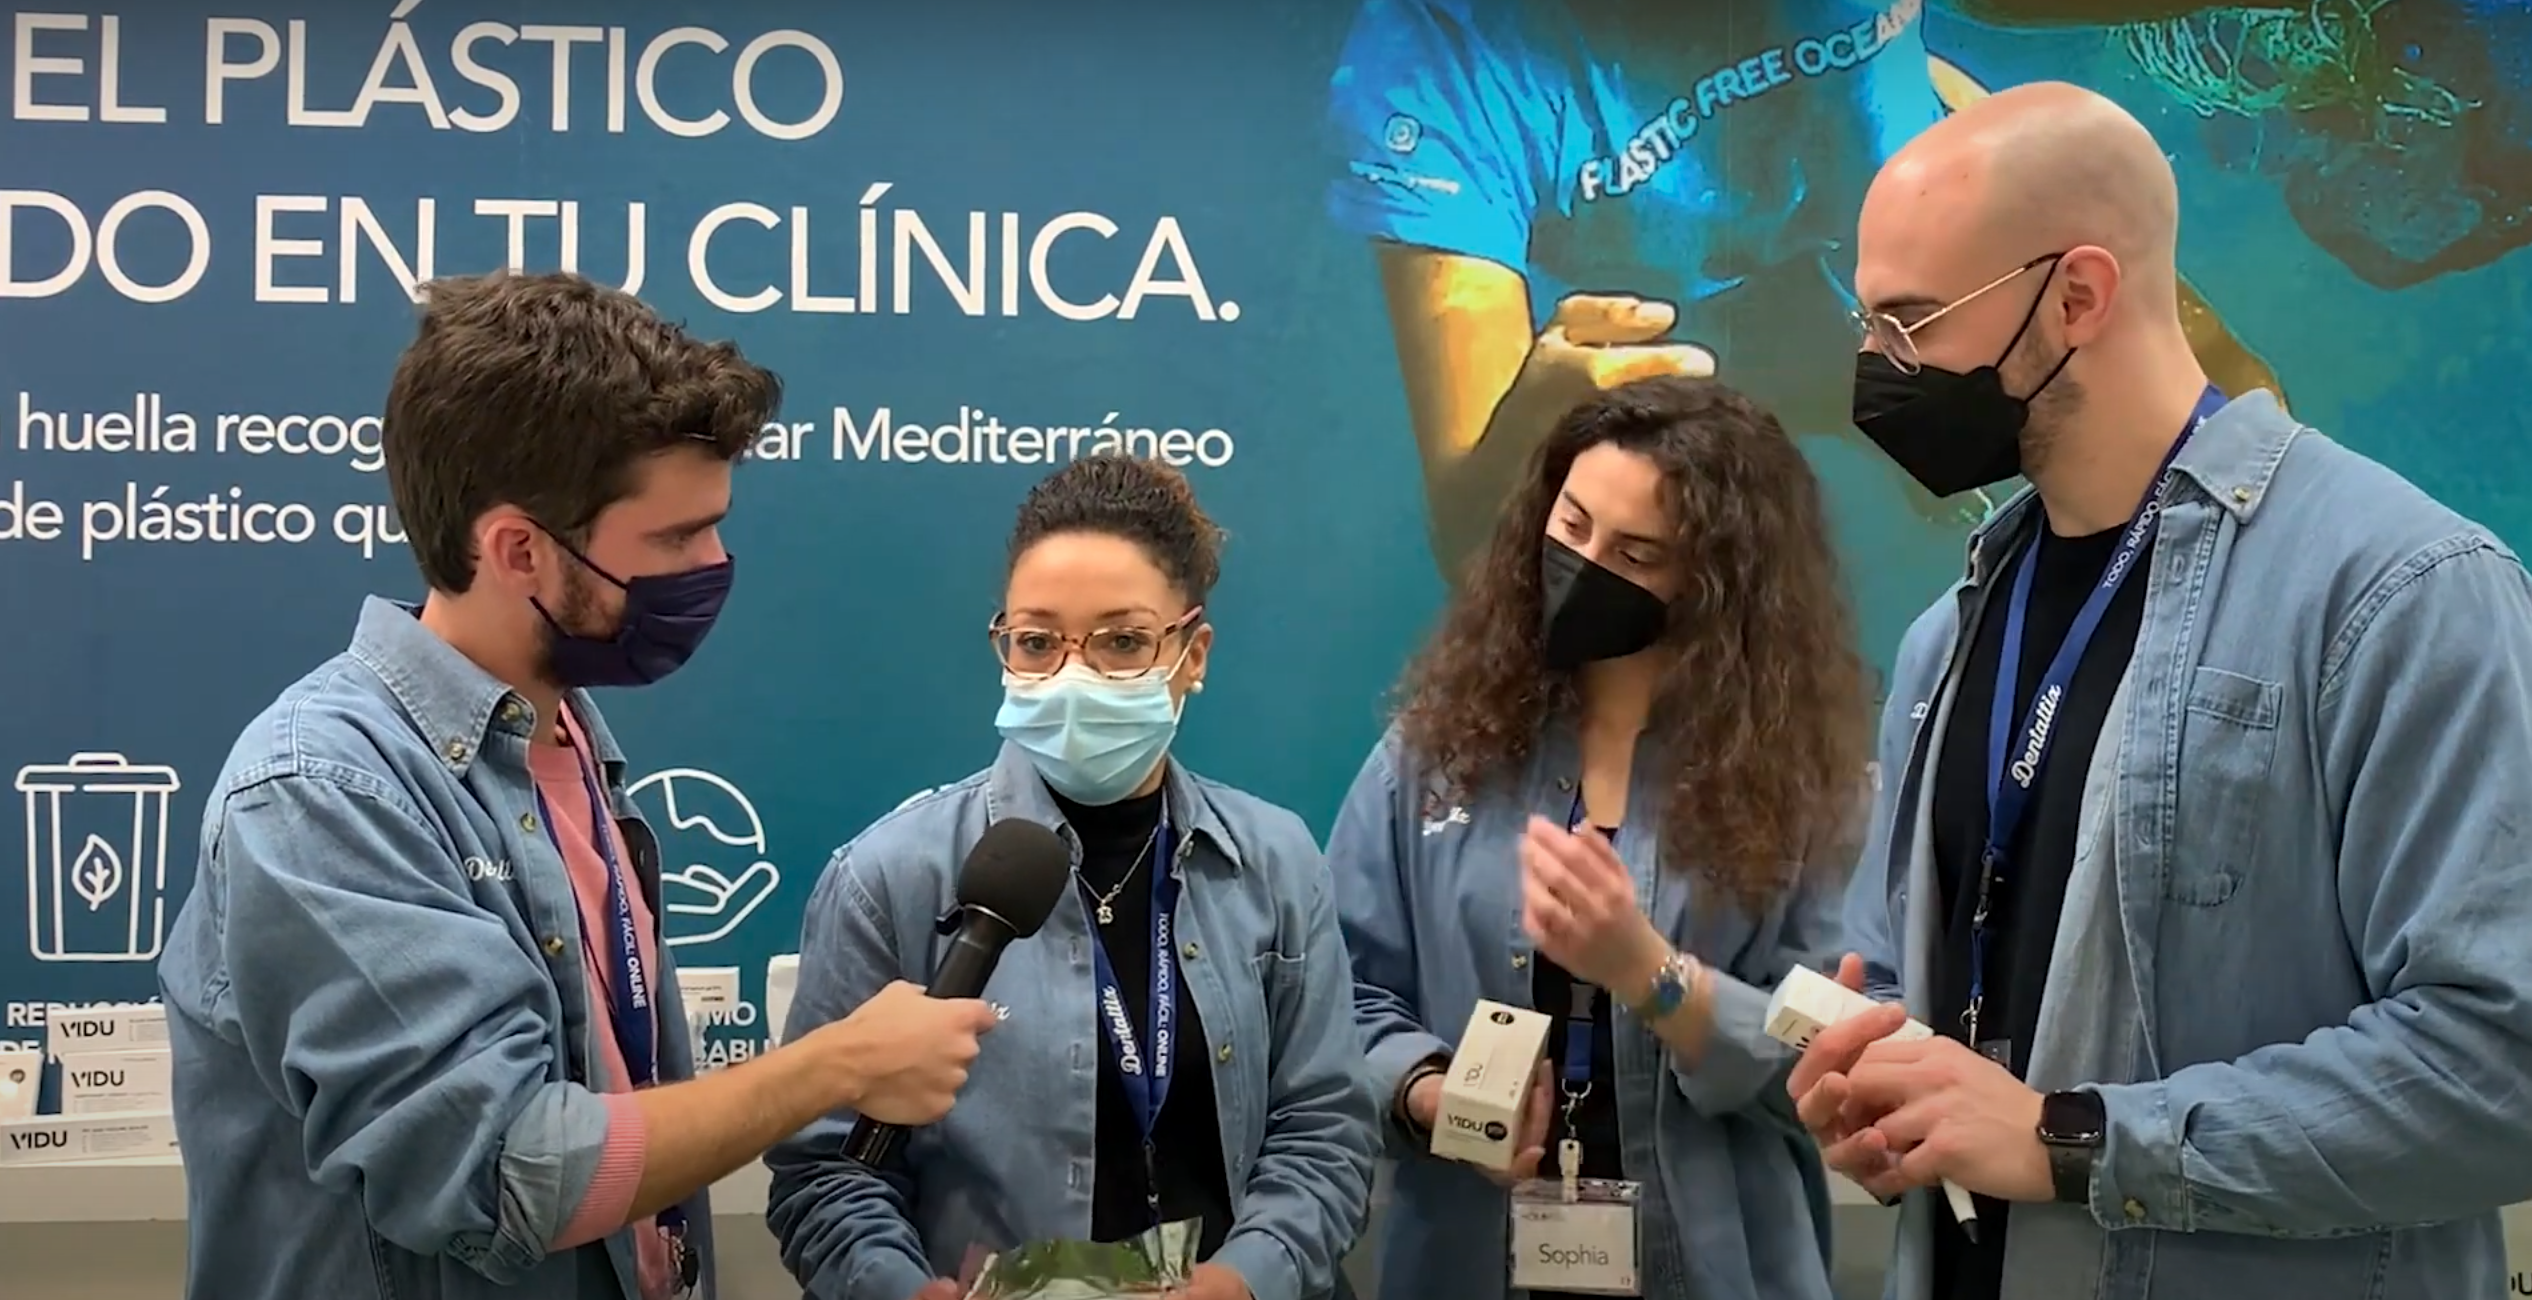 interviews at the Expodental 2022